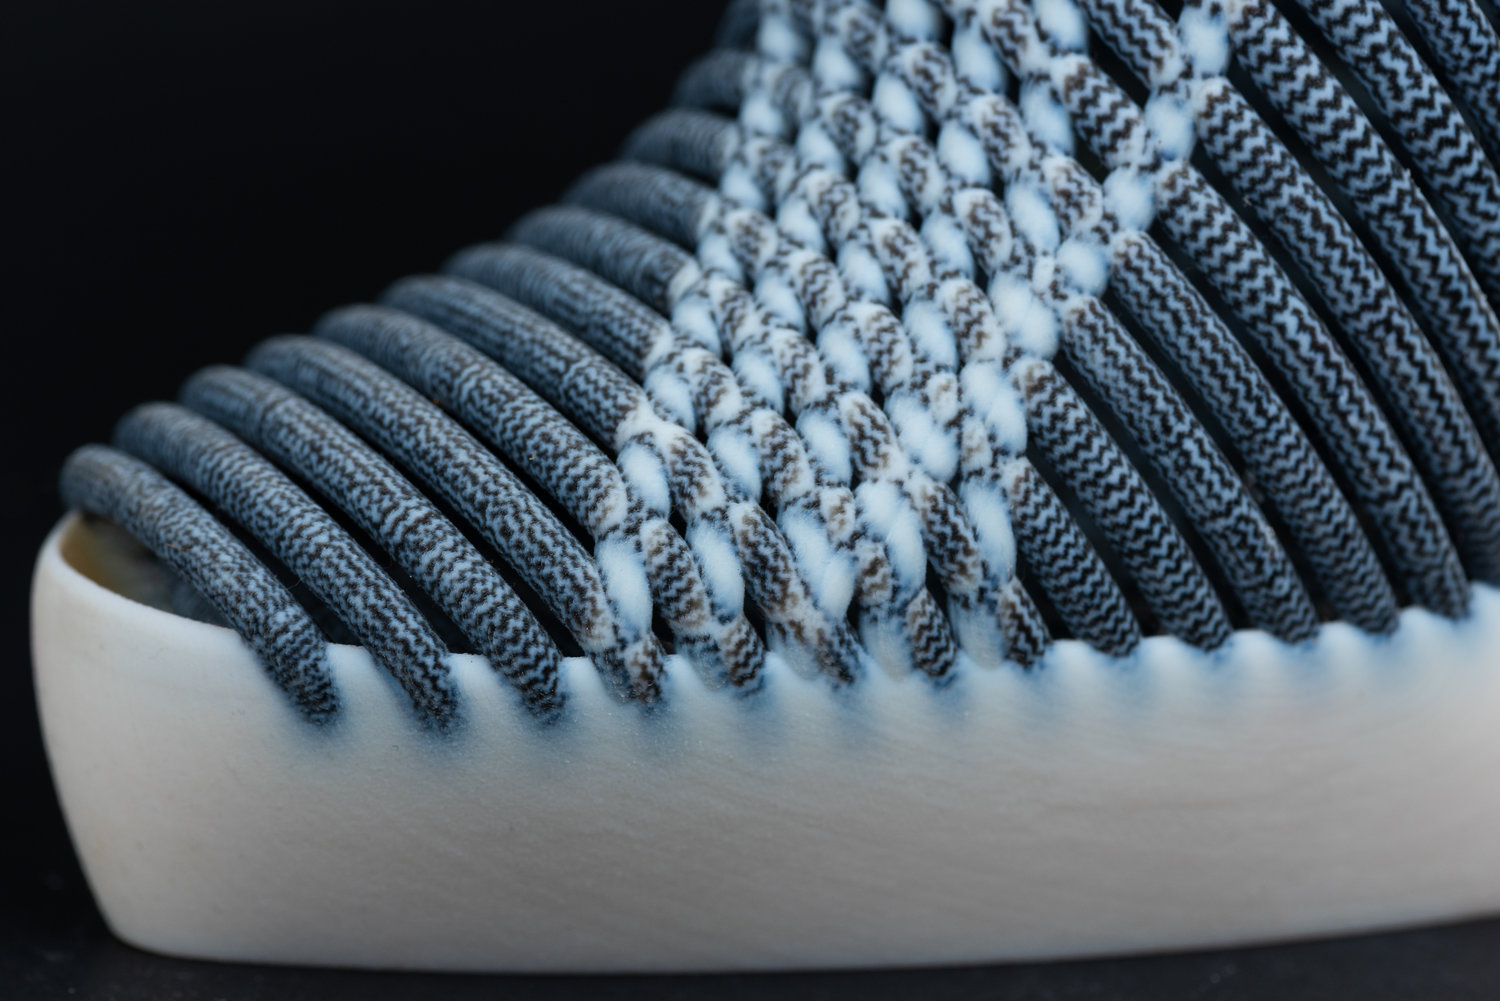 Details of the shoe made by combining 3D printing and ikat weaving. Image via Ganit Goldstein.